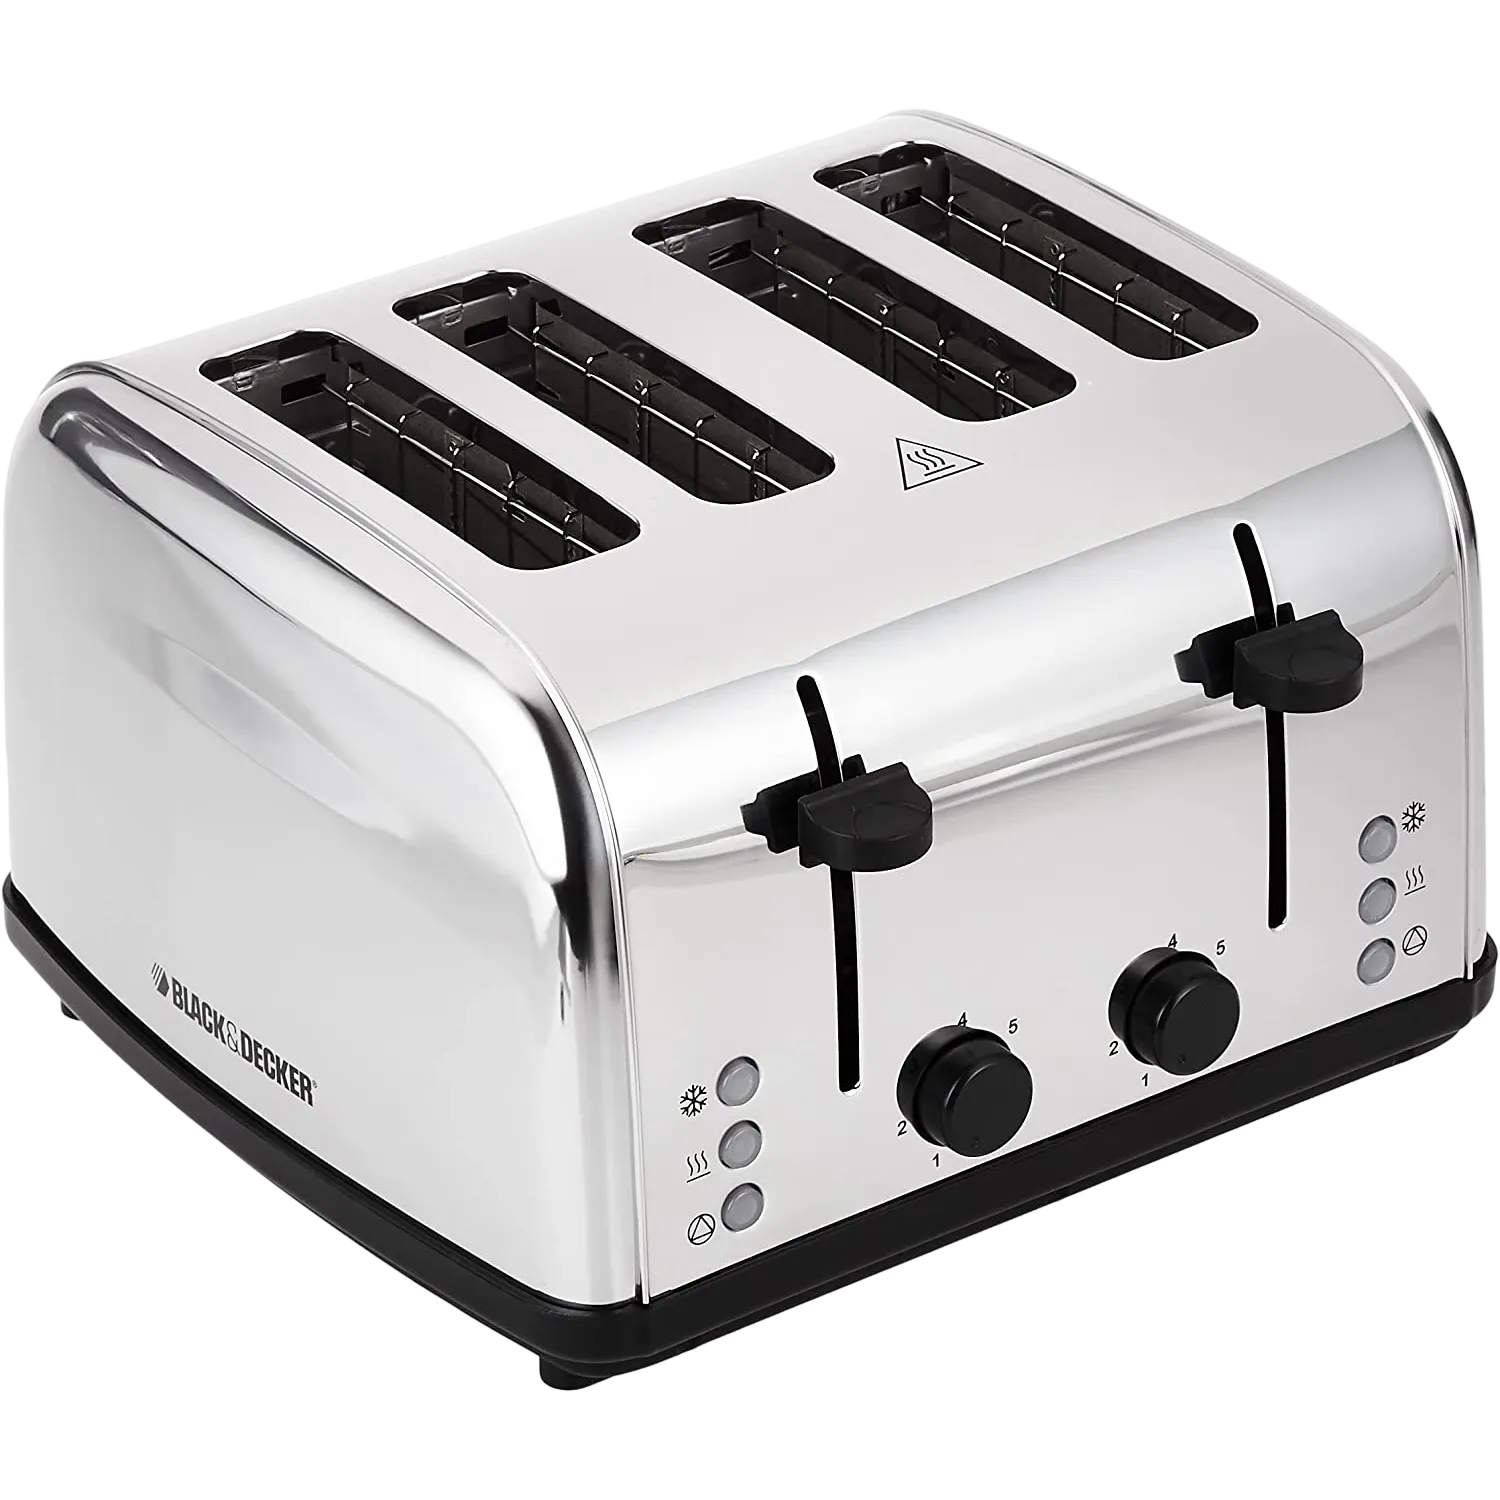 Black+Decker Bread Toaster Stainless Steel 4 Slice With Crumb Tray ET304-B5 Silver/Black